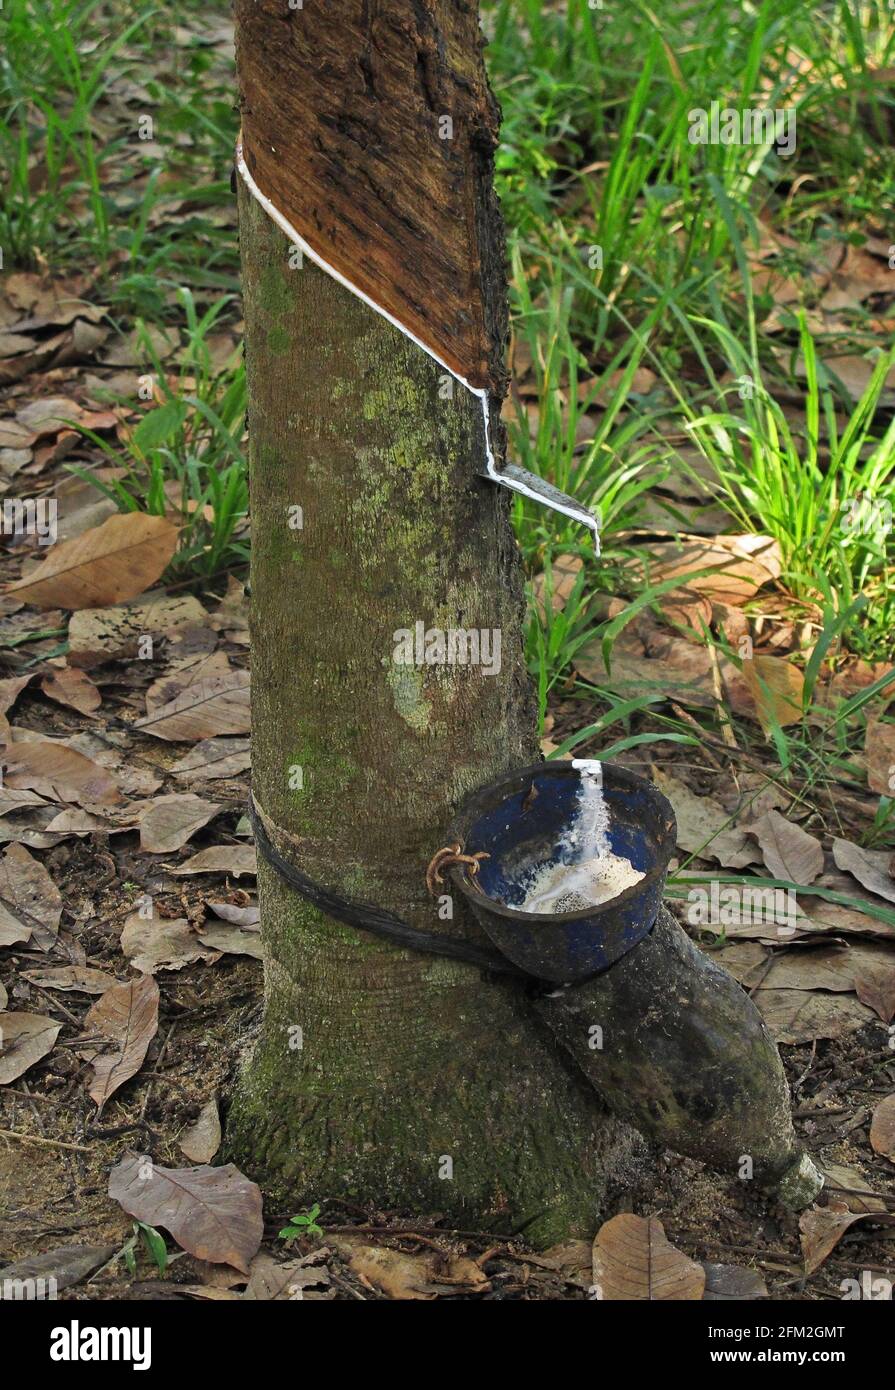 collecting rubber from Rubber Tree (Hevea brasiliensis)  near Way Kambas NP, Sumatra, Indonesia         June Stock Photo